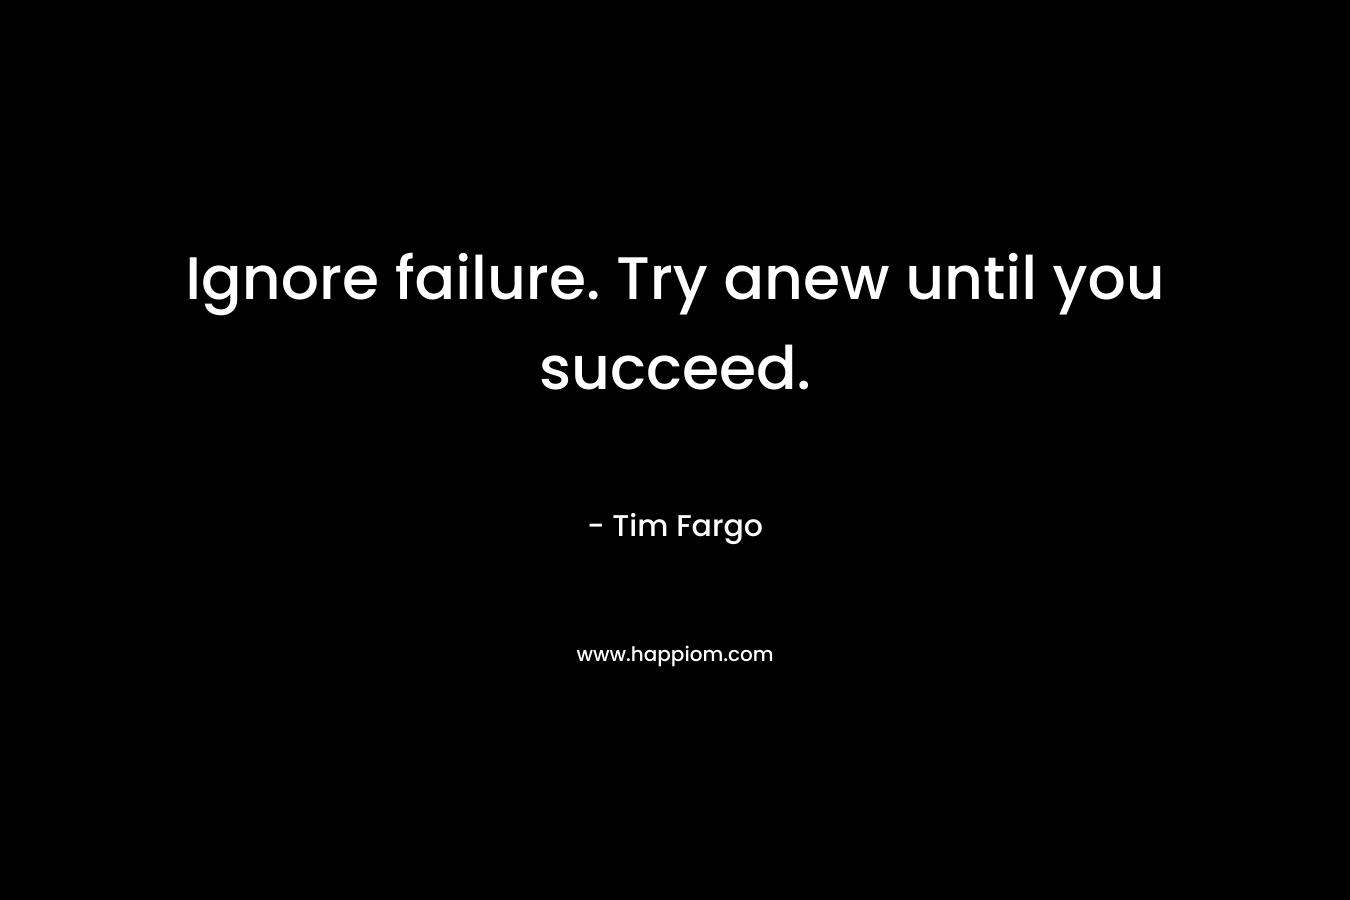 Ignore failure. Try anew until you succeed. – Tim Fargo